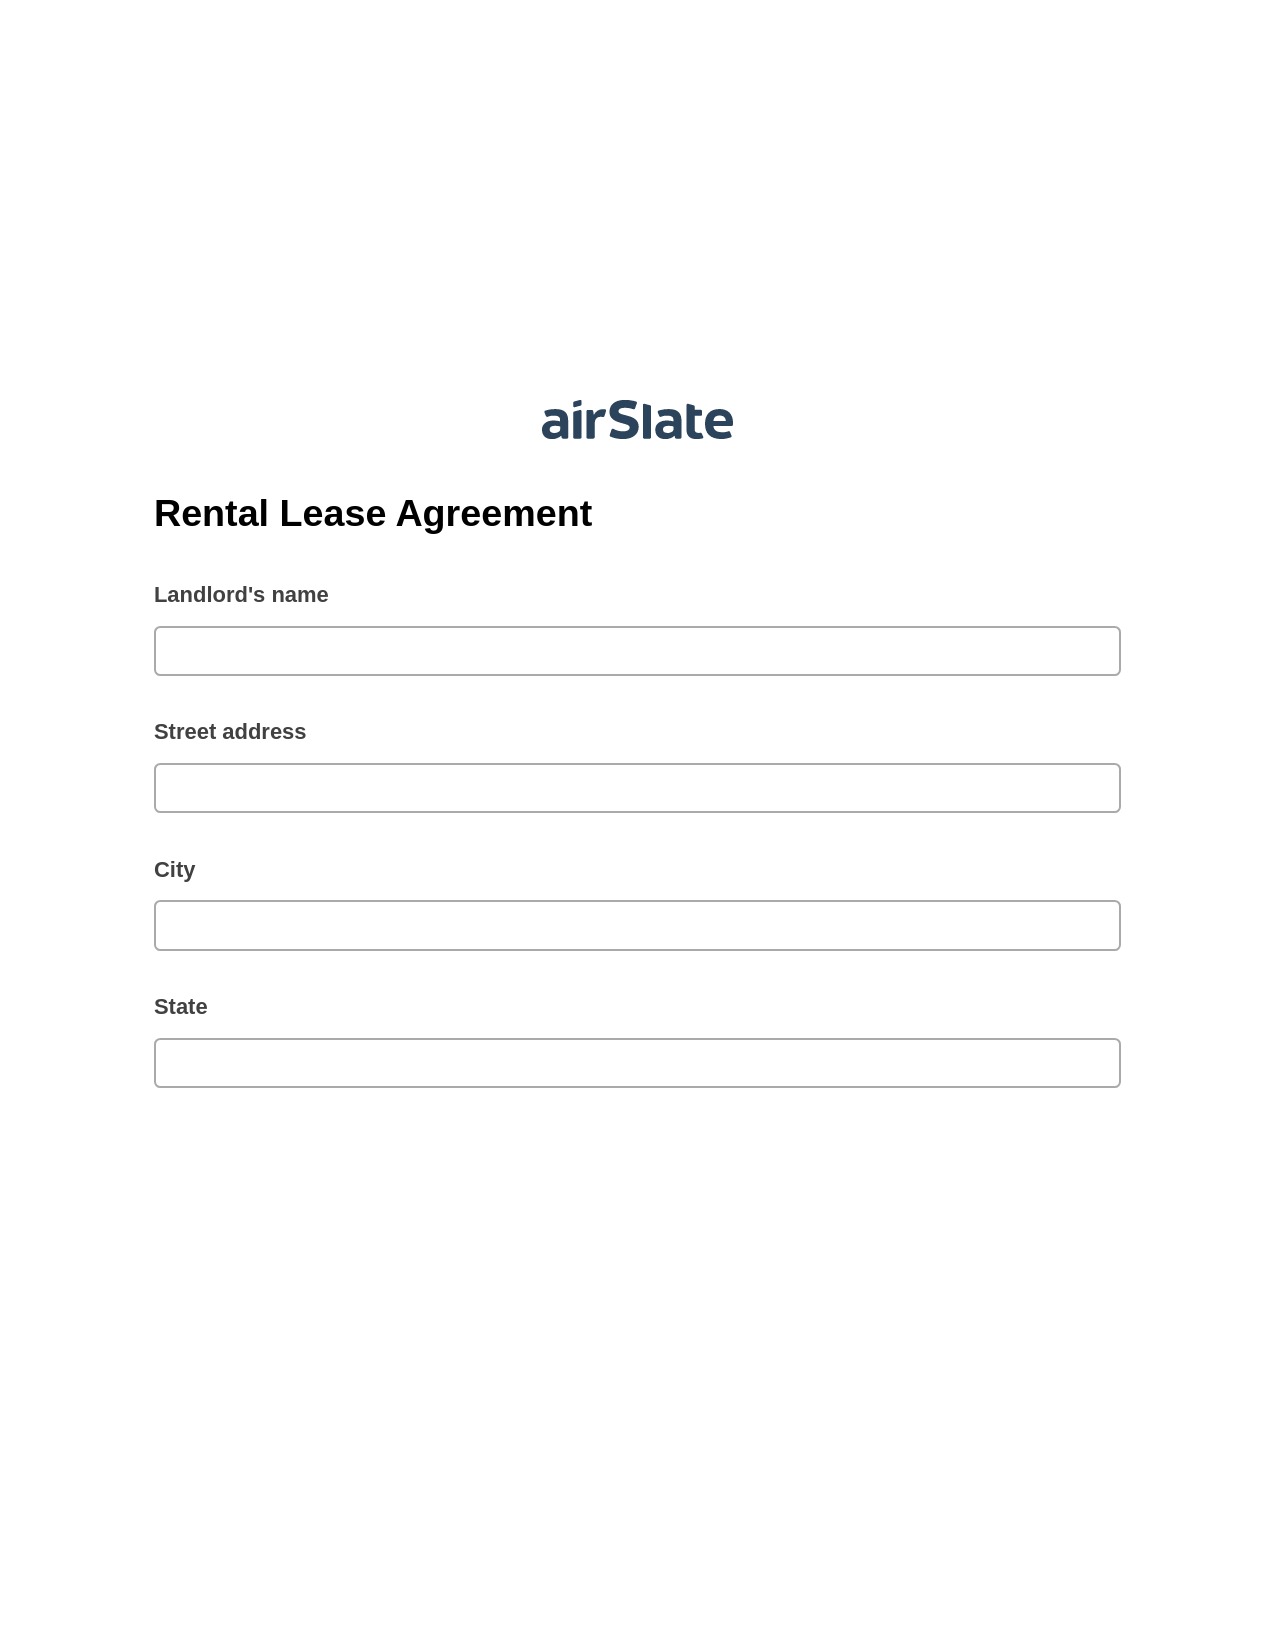 Multirole Rental Lease Agreement Pre-fill from CSV File Dropdown Options Bot, Document Hide Bot, Post-finish Document Bot